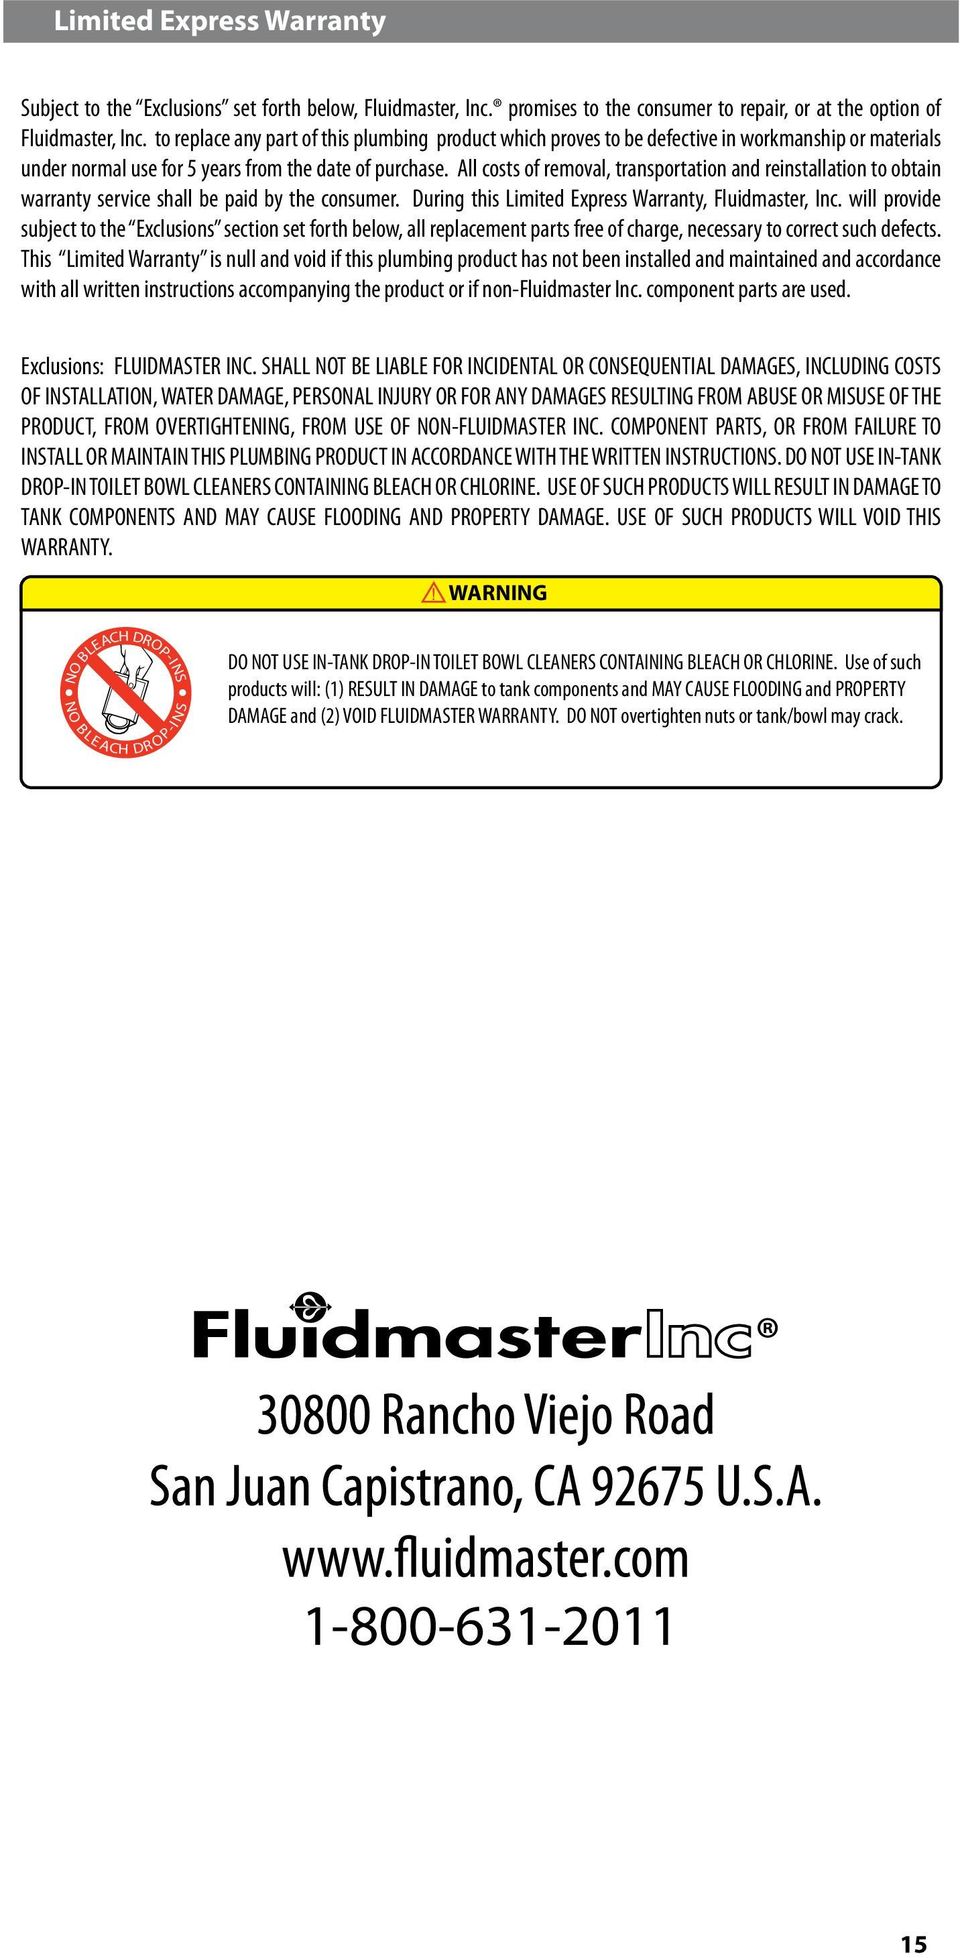 All costs of removal, transportation and reinstallation to obtain warranty service shall be paid by the consumer. During this Limited Express Warranty, Fluidmaster, Inc.